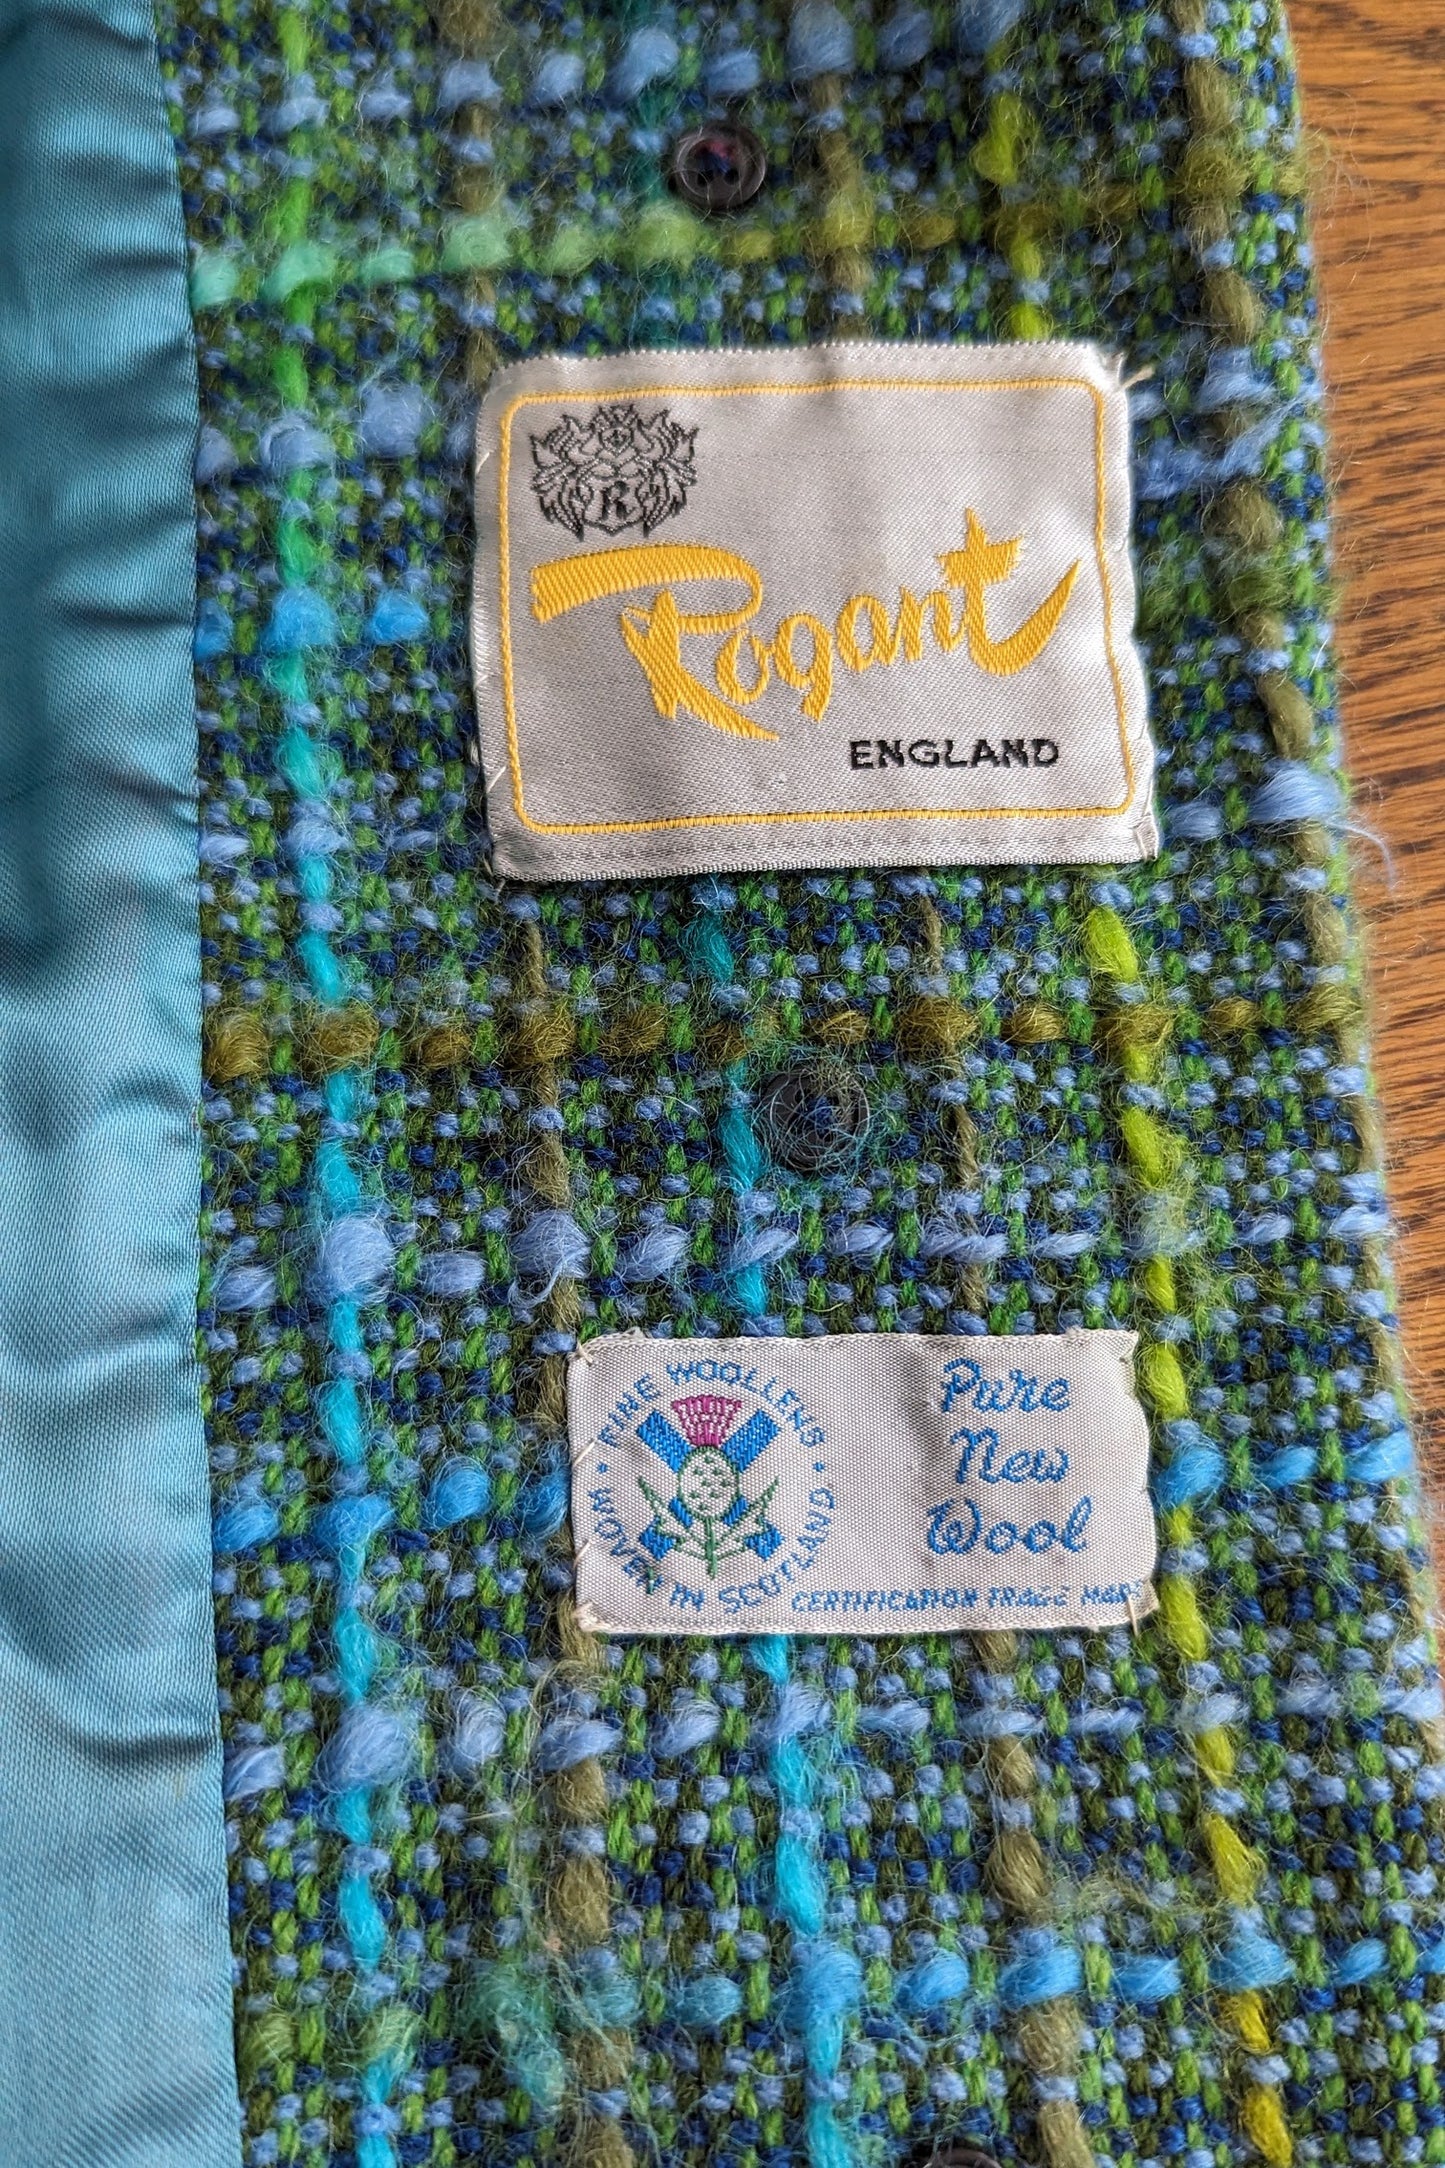 Rogant England and pure wool labels